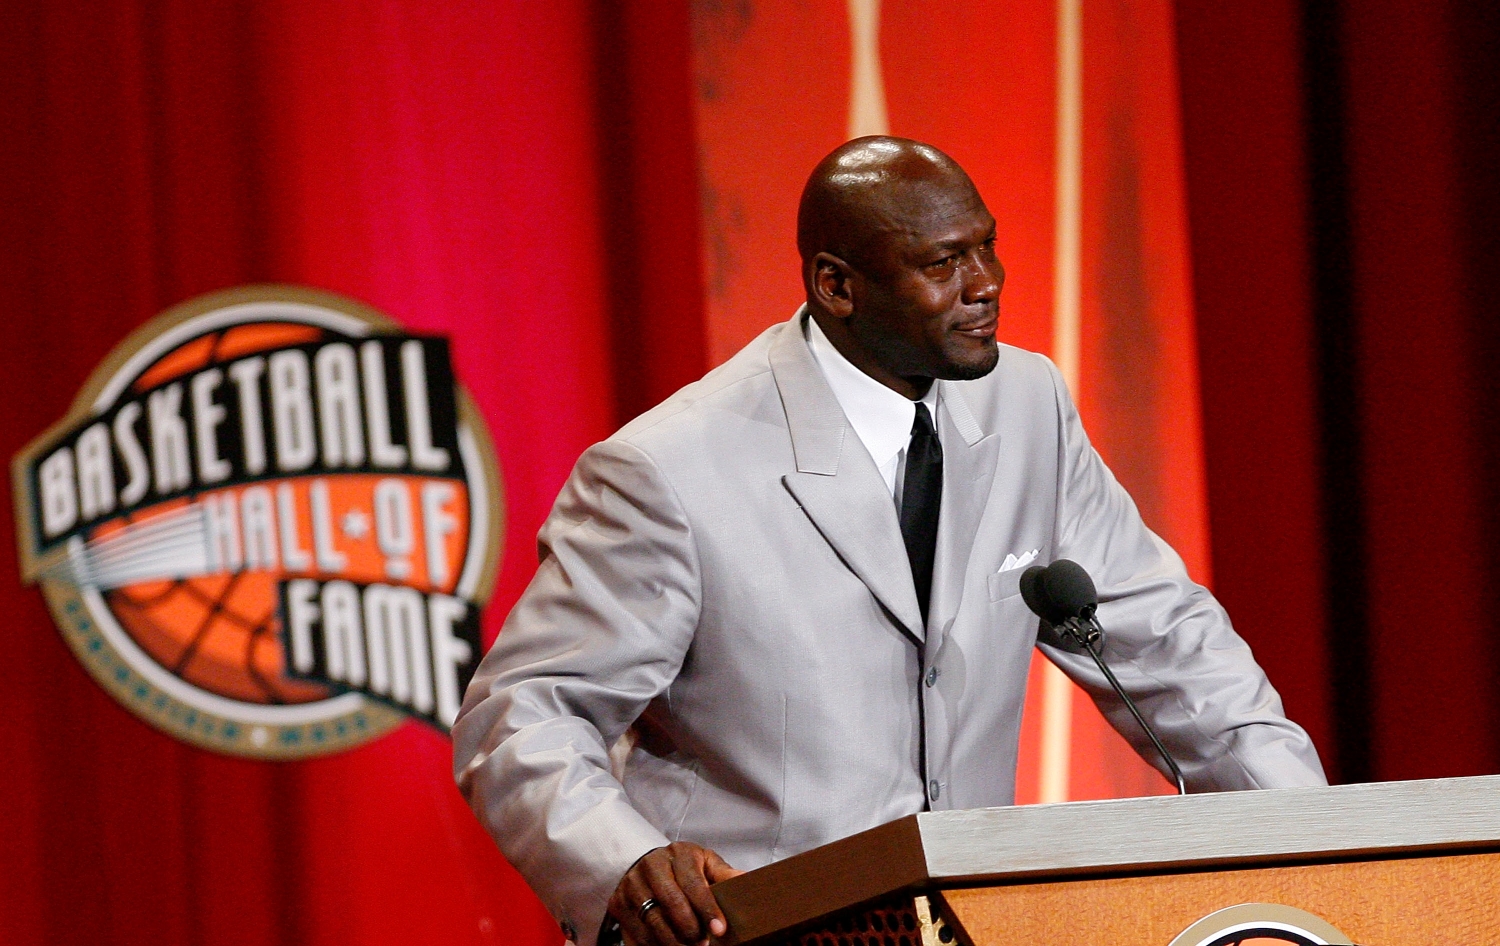 Michael Jordan stands at the podium during his induction into the Naismith Memorial Basketball Hall of Fame.